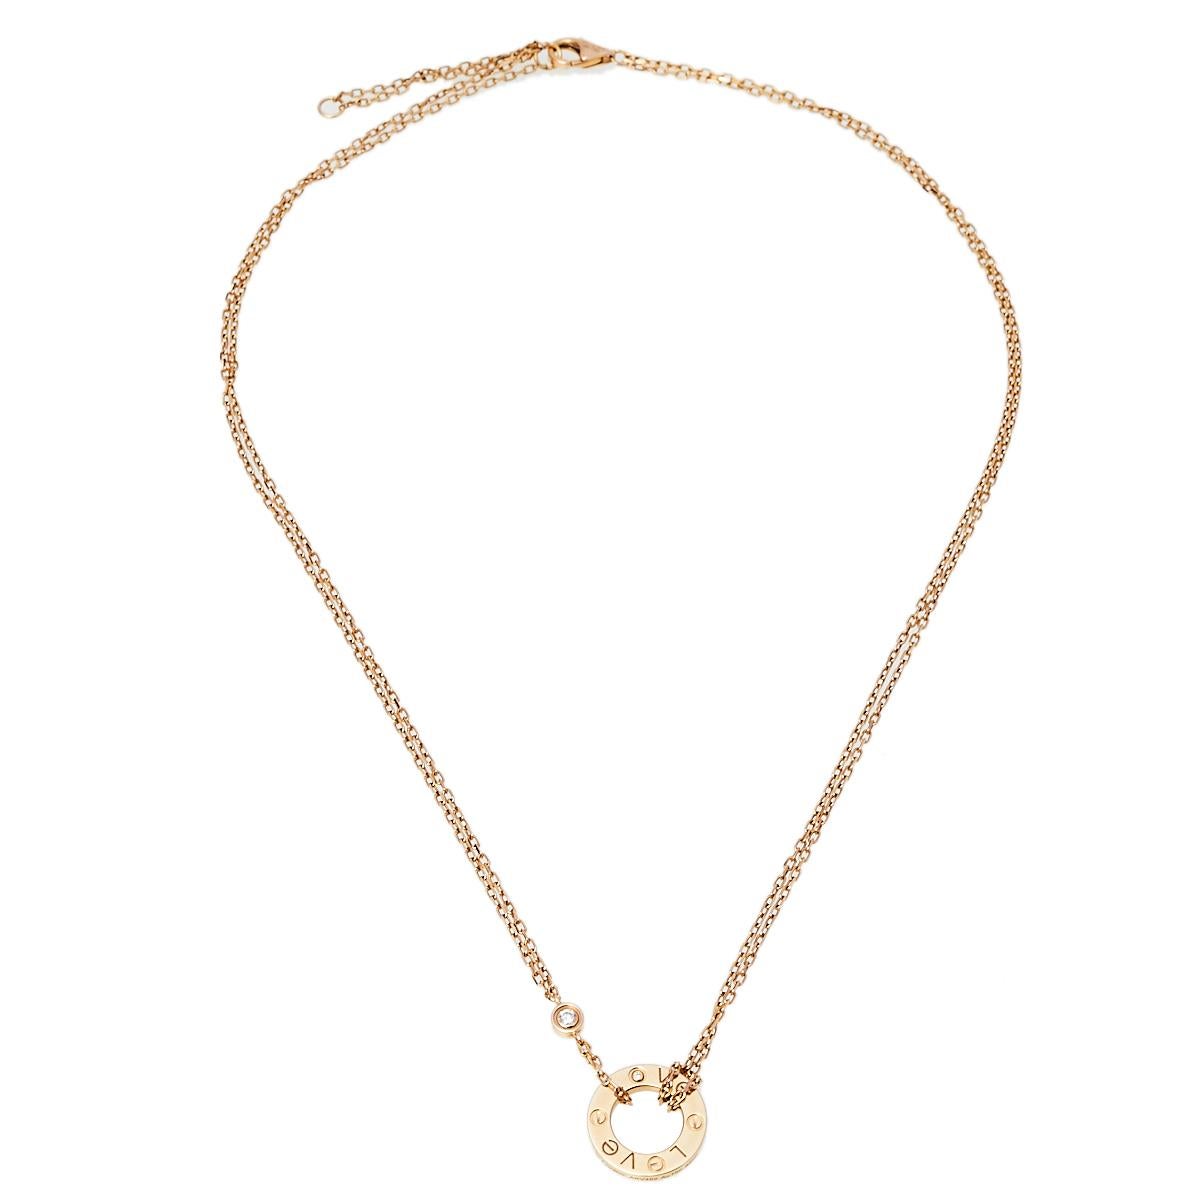 A look at this Cartier creation and one is sure to be won over. Simple in appeal but overflowing with artistic excellence, this Love necklace is a testament to the wondrous craftsmanship and the painstaking effort that goes into making a Cartier